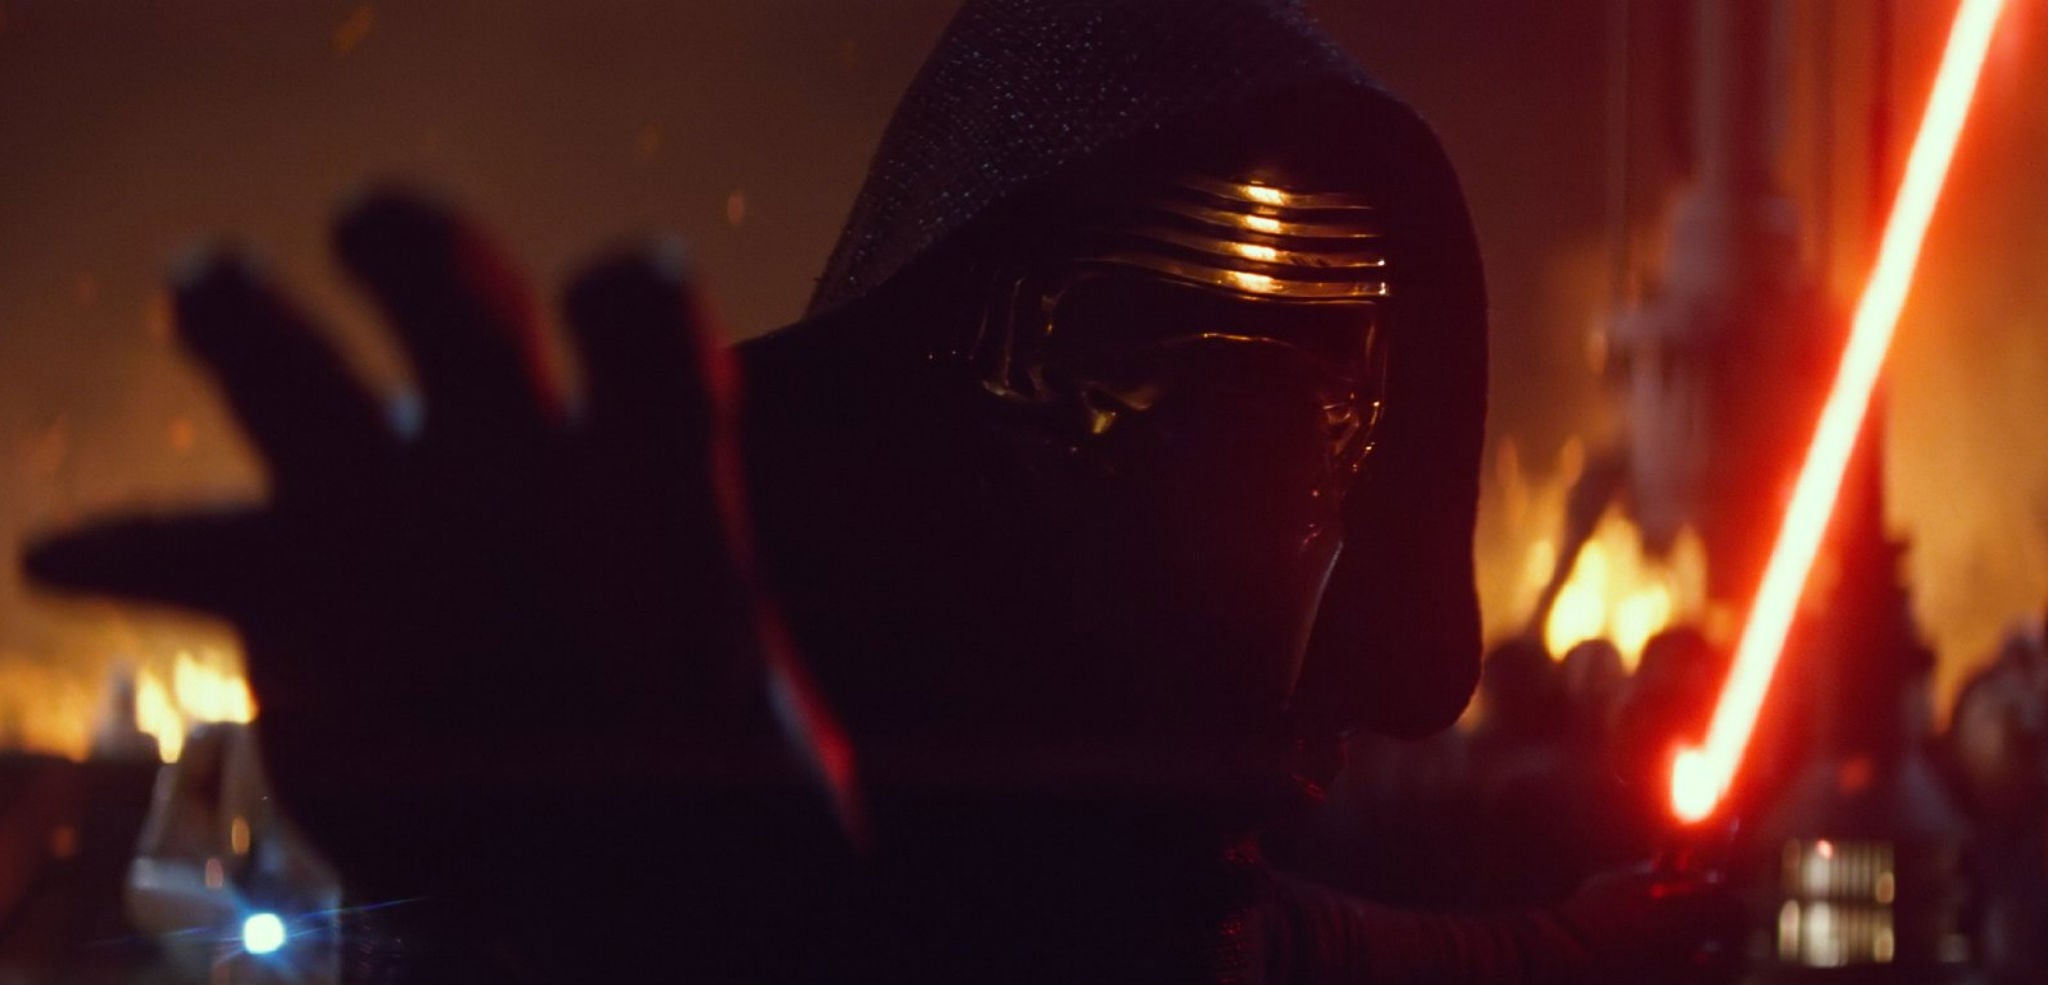 Kylo Ren might not be who you think he is